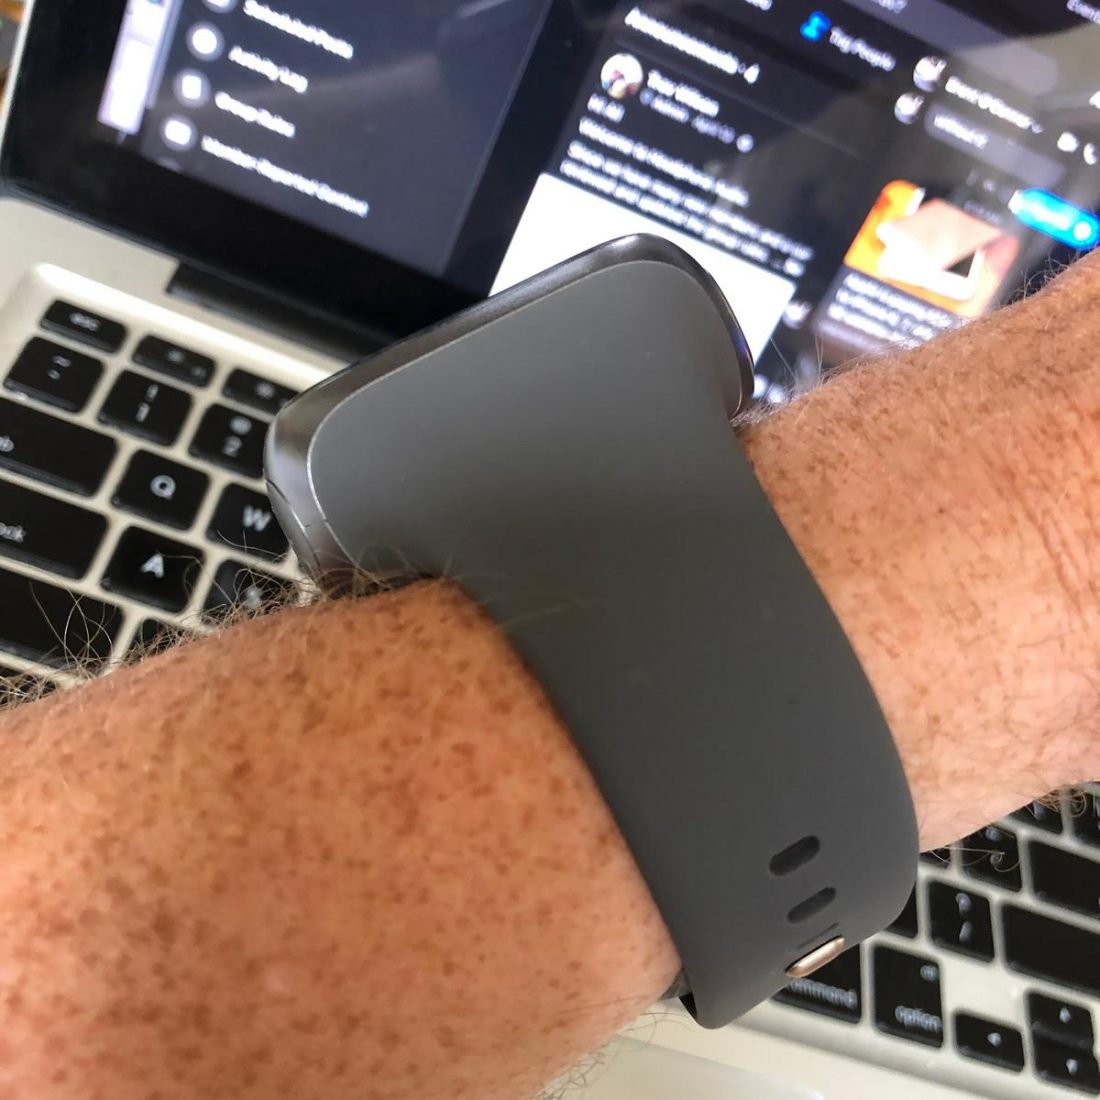 Just look at that dainty little thing. No... not my wrist! The Wearbuds Pro!